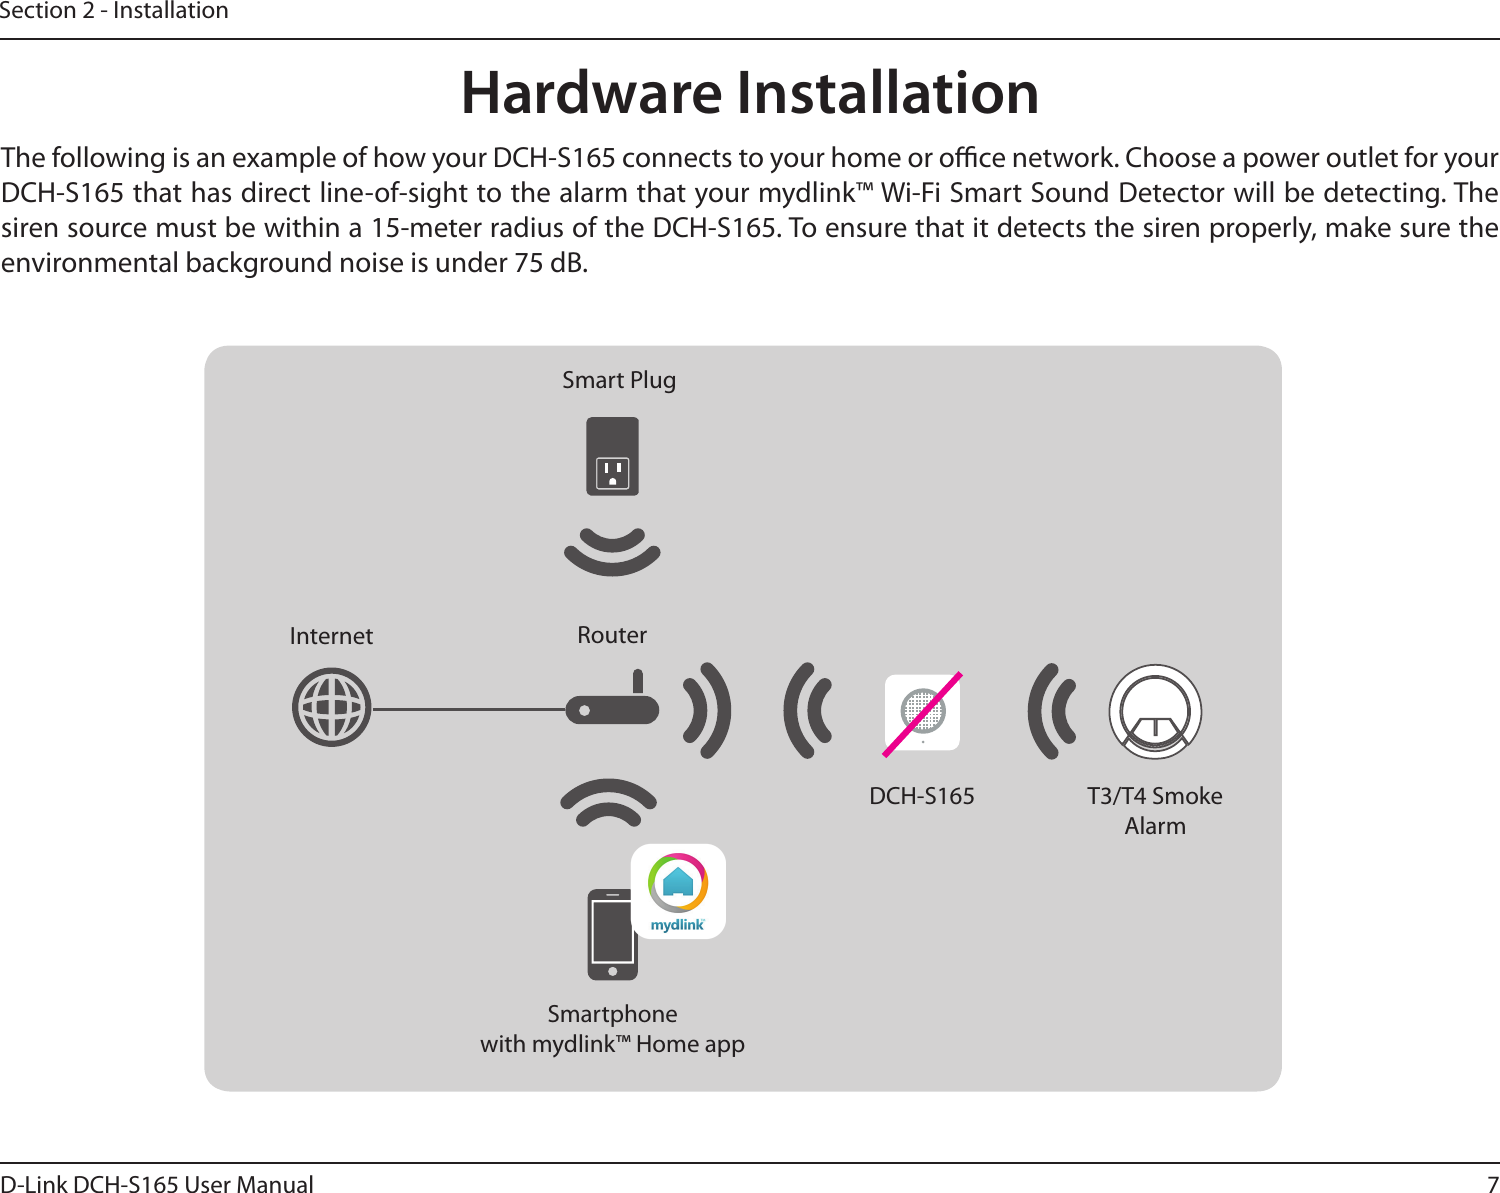 7D-Link DCH-S165 User ManualSection 2 - InstallationHardware InstallationThe following is an example of how your DCH-S165 connects to your home or oce network. Choose a power outlet for your DCH-S165 that has direct line-of-sight to the alarm that your mydlink™ Wi-Fi Smart Sound Detector will be detecting. The siren source must be within a 15-meter radius of the DCH-S165. To ensure that it detects the siren properly, make sure the environmental background noise is under 75 dB.Smartphonewith mydlink™ Home appInternetSmart PlugRouterDCH-S165 T3/T4 Smoke Alarm